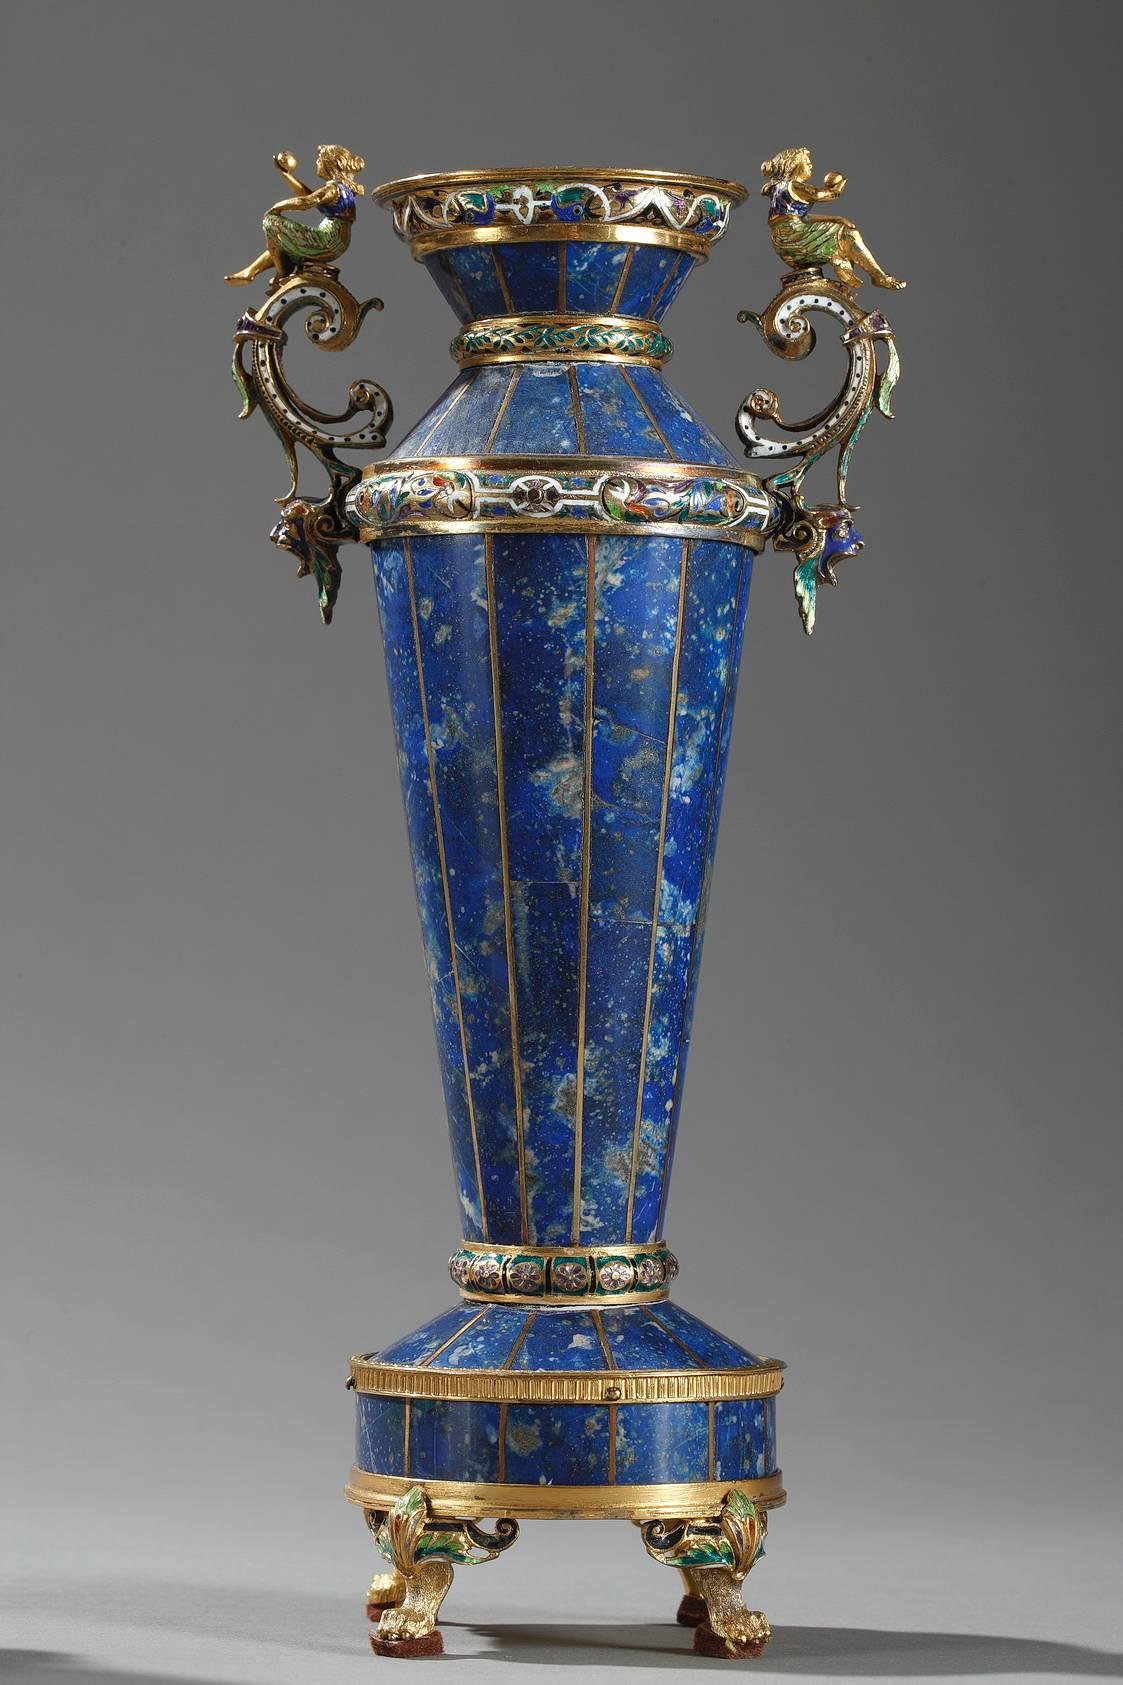 Set composed of a clock and a pair of vases with silver-gilt mounting. They are richly decorated with scrollwork, foliage, and busts of winged women. The small, circular enamel clock face is decorated with birds and rinceau. It is set on a sectioned